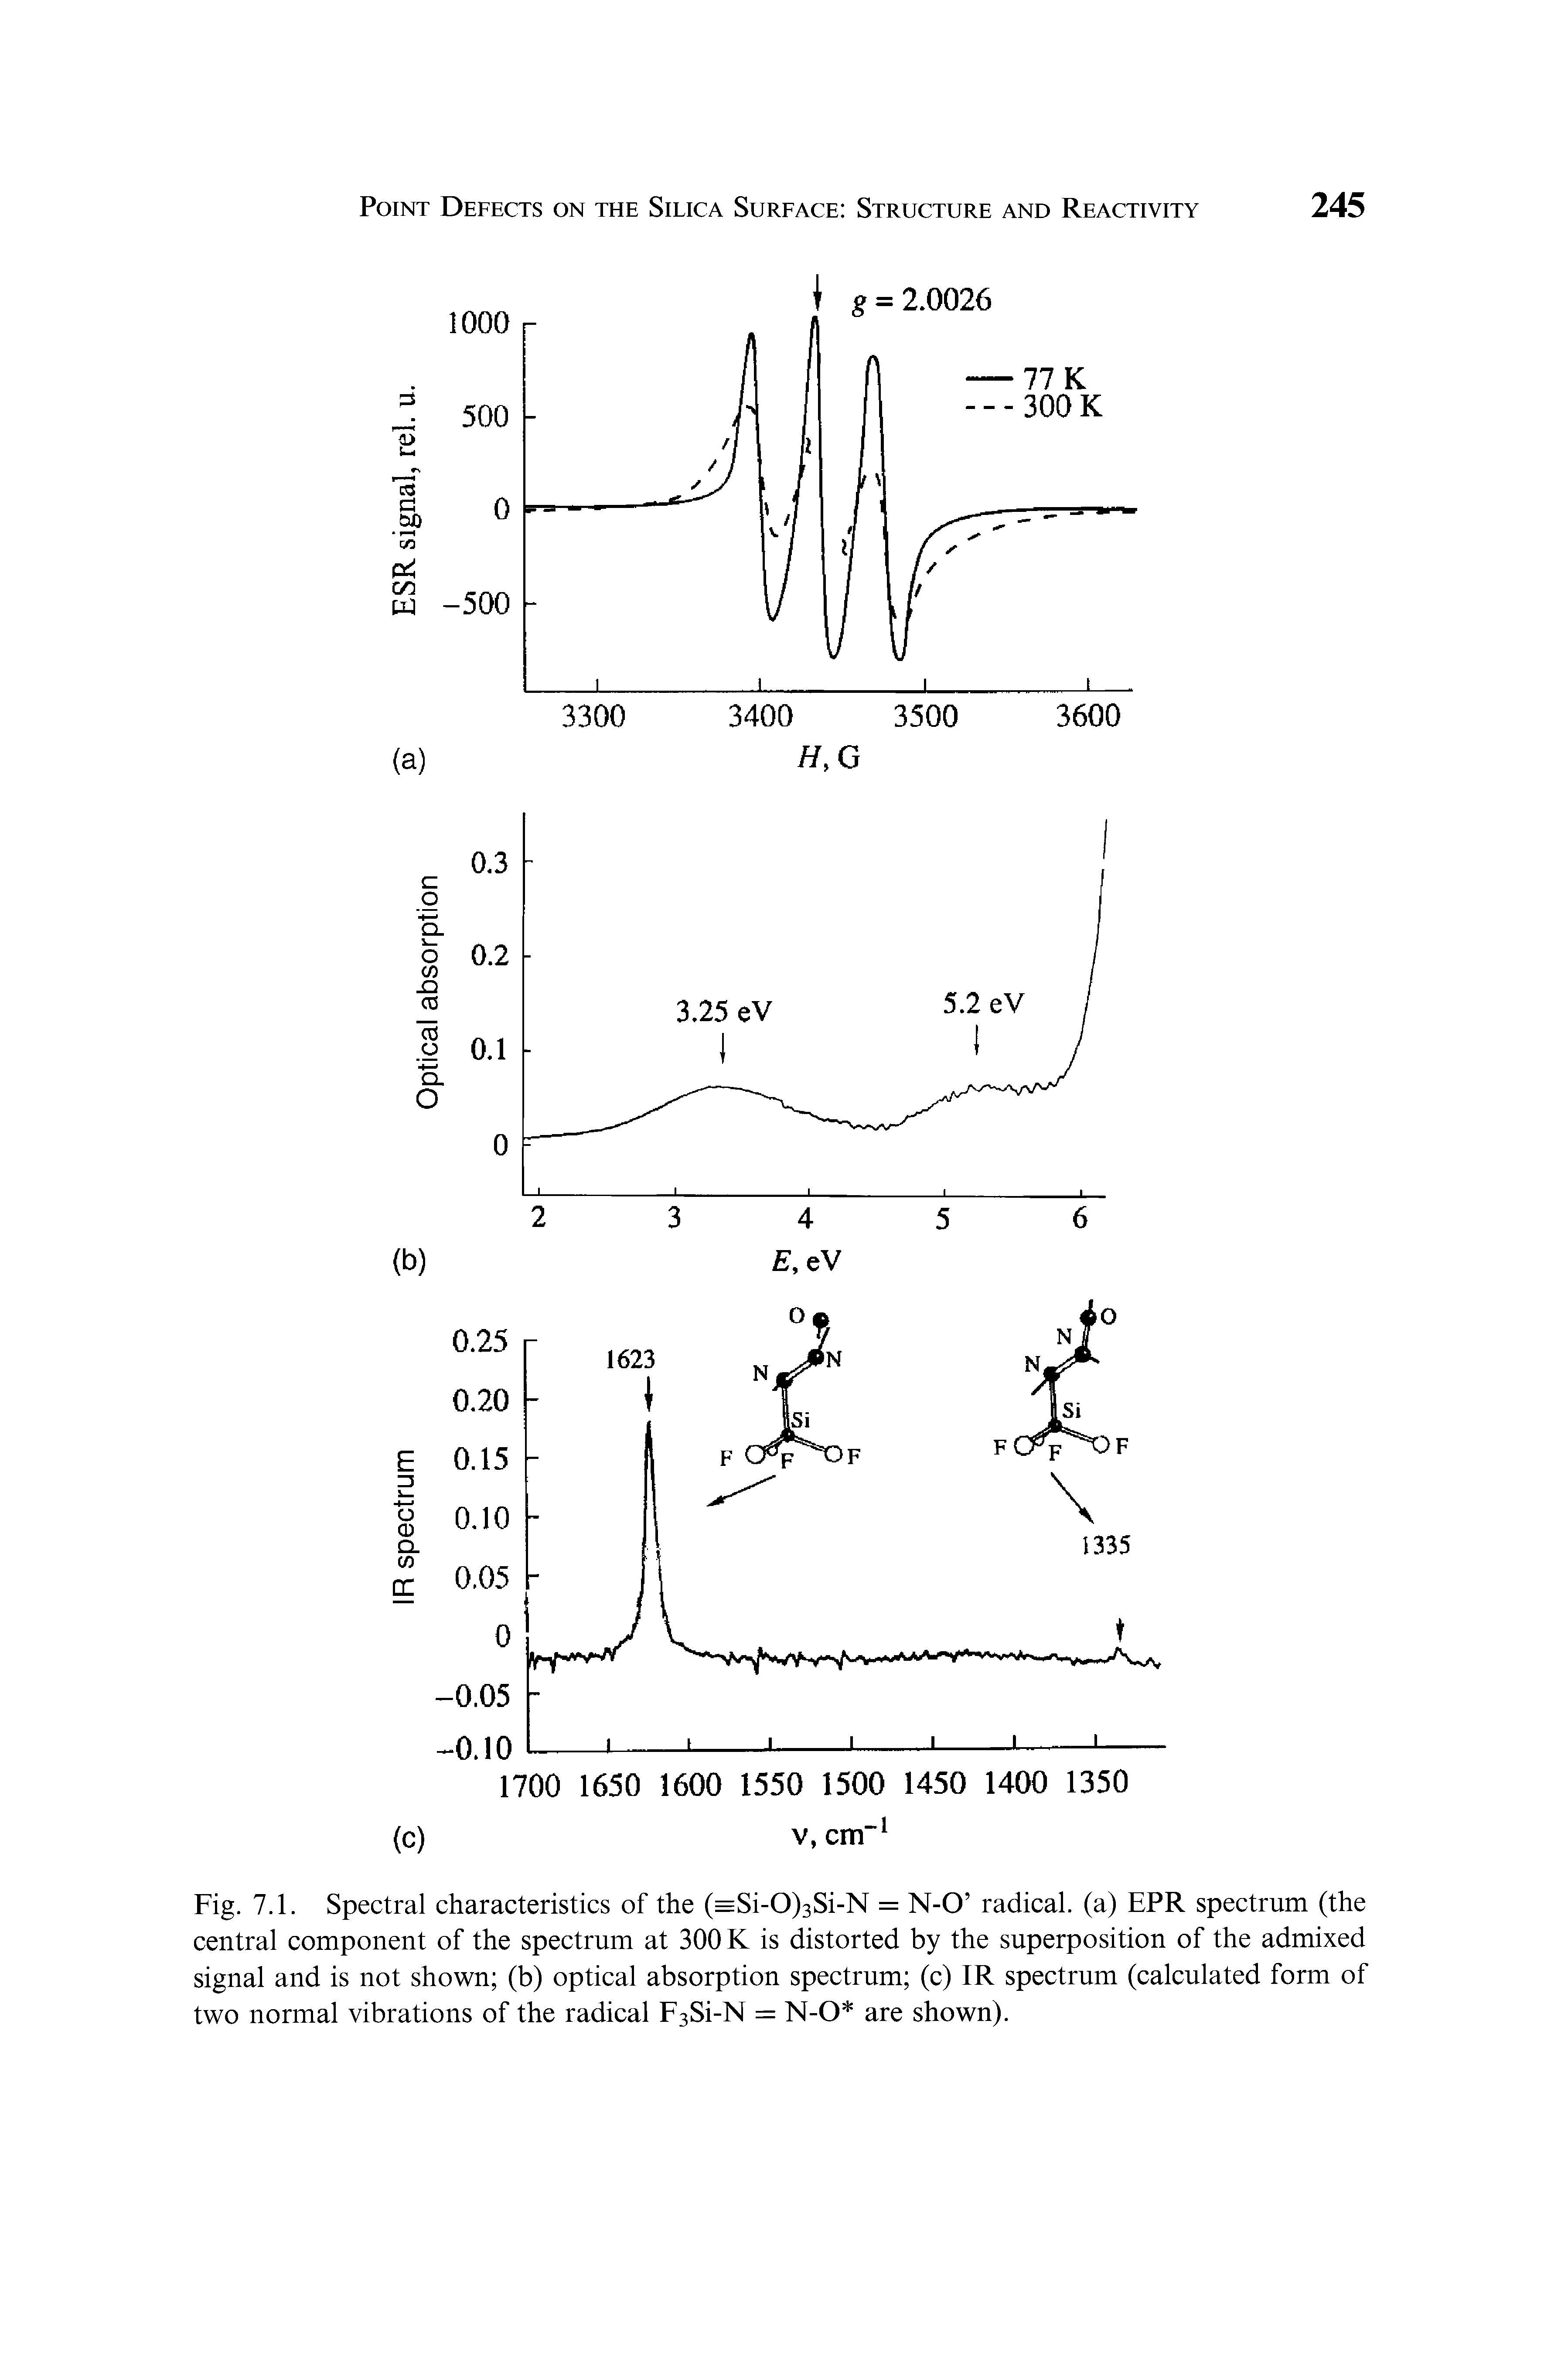 Fig. 7.1. Spectral characteristics of the (=Si-0)3Si-N = N-O radical, (a) EPR spectrum (the central component of the spectrum at 300 K is distorted by the superposition of the admixed signal and is not shown (b) optical absorption spectrum (c) IR spectrum (calculated form of two normal vibrations of the radical F3Si-N = N-O are shown).